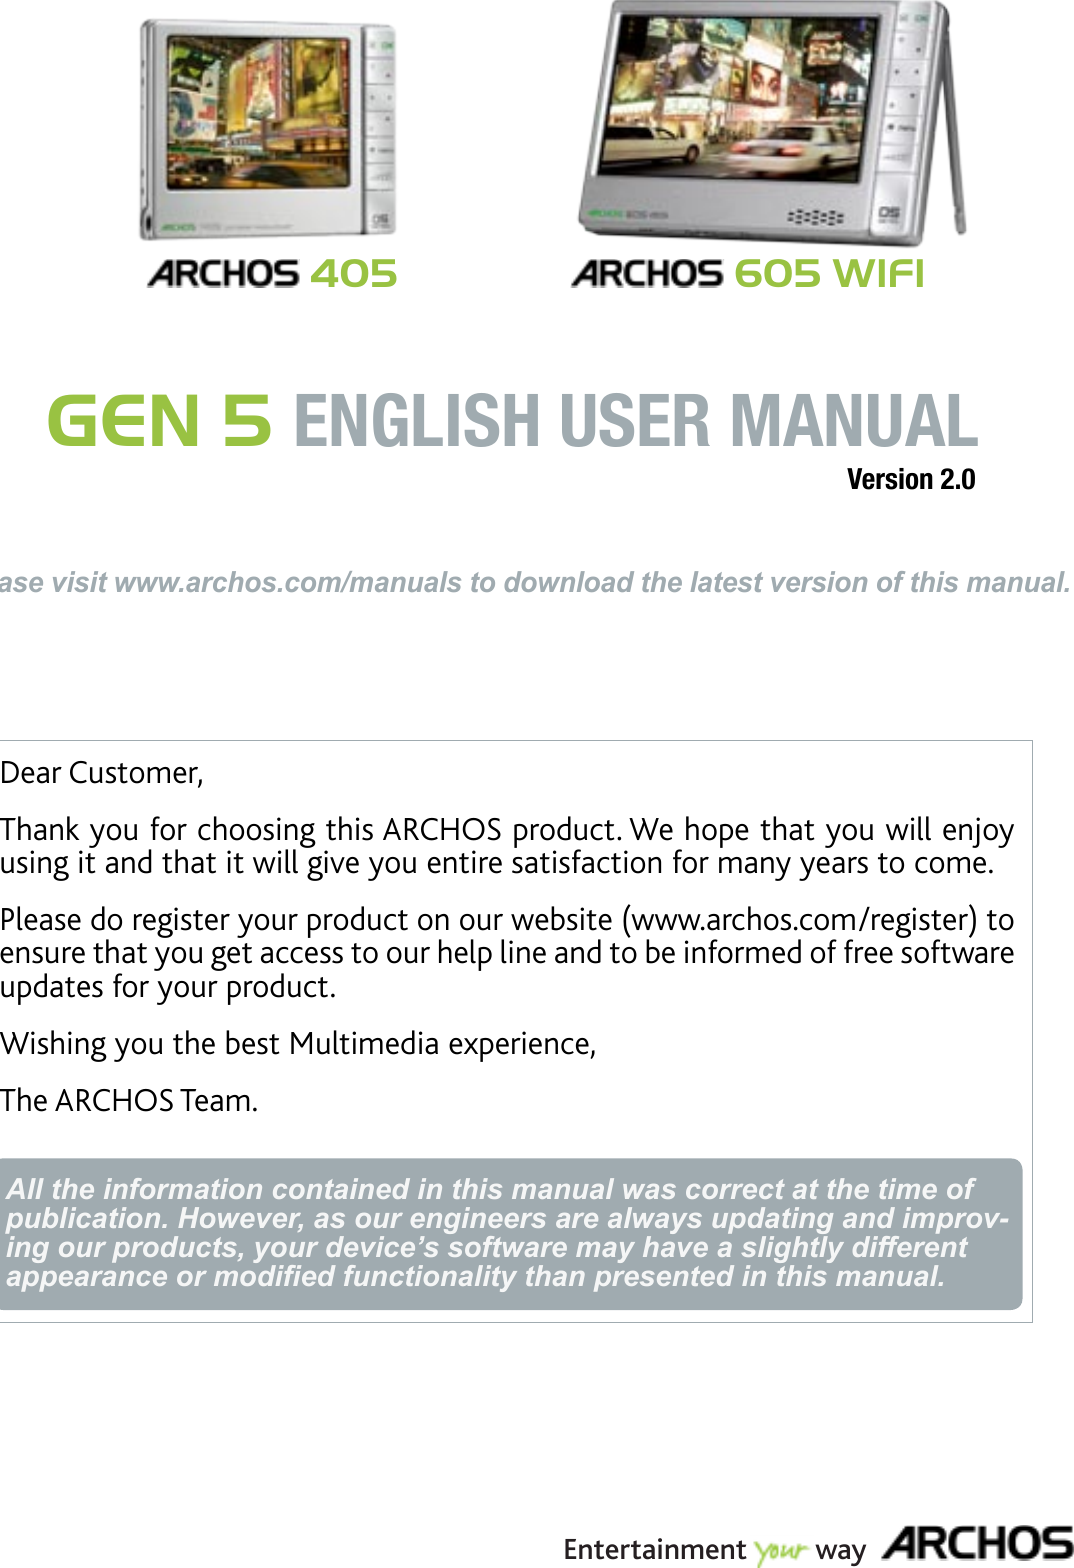 Dear Customer,Thank you for choosing this ARCHOS product. We hope that you will enjoy using it and that it will give you entire satisfaction for many years to come. Please do register your product on our website (www.archos.com/register) to ensure that you get access to our help line and to be informed of free software updates for your product.Wishing you the best Multimedia experience,The ARCHOS Team.All the information contained in this manual was correct at the time of publication. However, as our engineers are always updating and improv-ing our products, your device’s software may have a slightly different appearance or modied functionality than presented in this manual.ENGLISHPlease visit www.archos.com/manuals to download the latest version of this manual.GEN 5 ENGLISH USER MANUAL 405Version 2.0Entertainment         way 605 WIFI